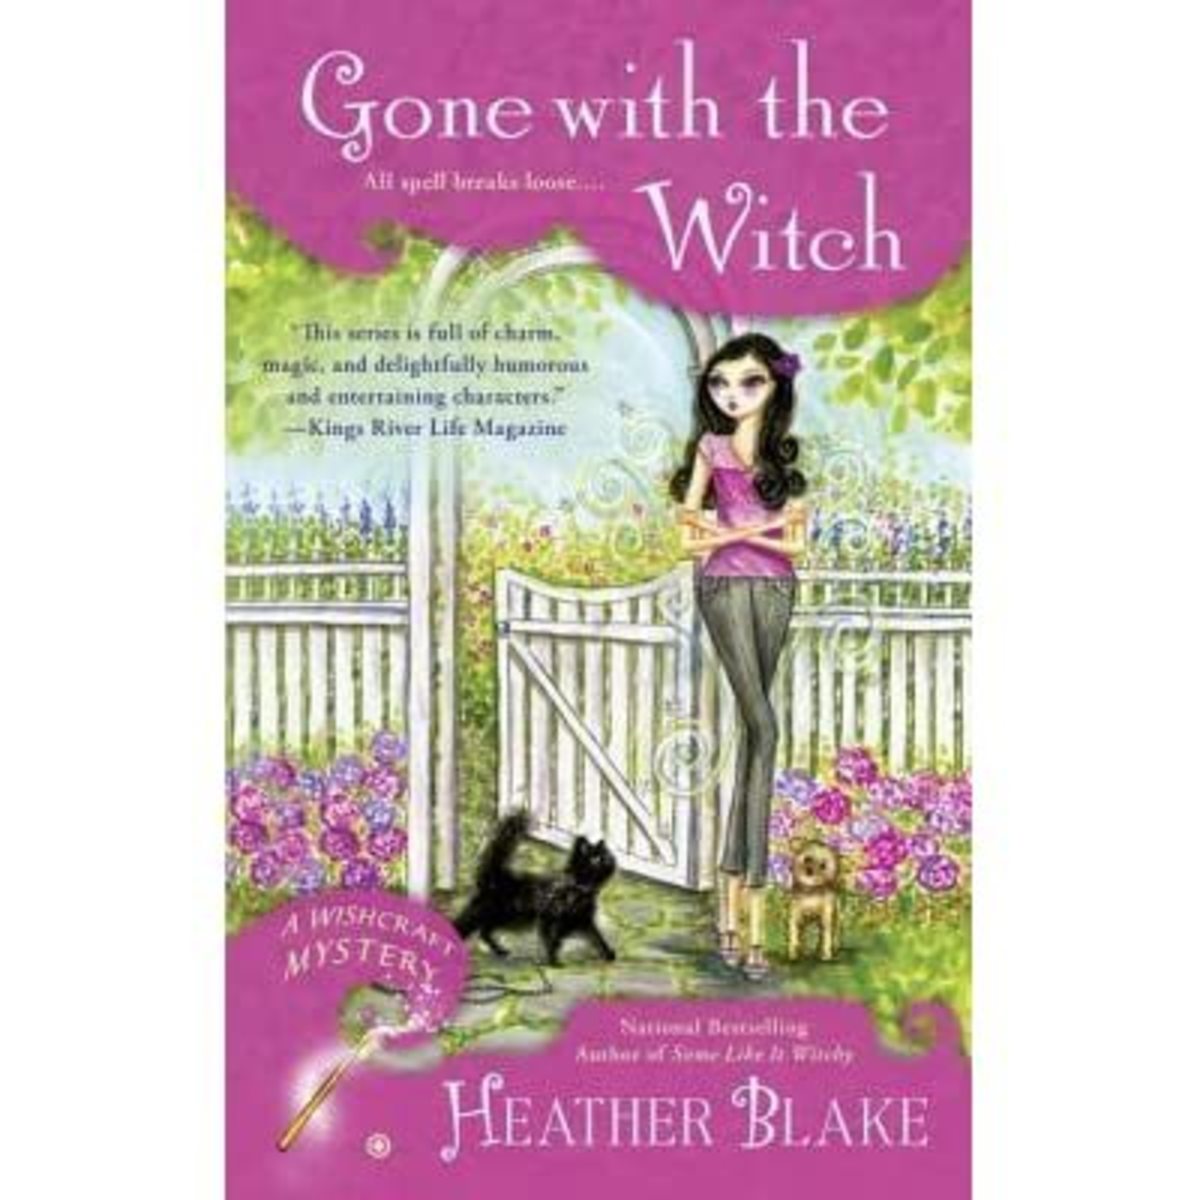 book-review-gone-with-the-witch-by-heather-blake